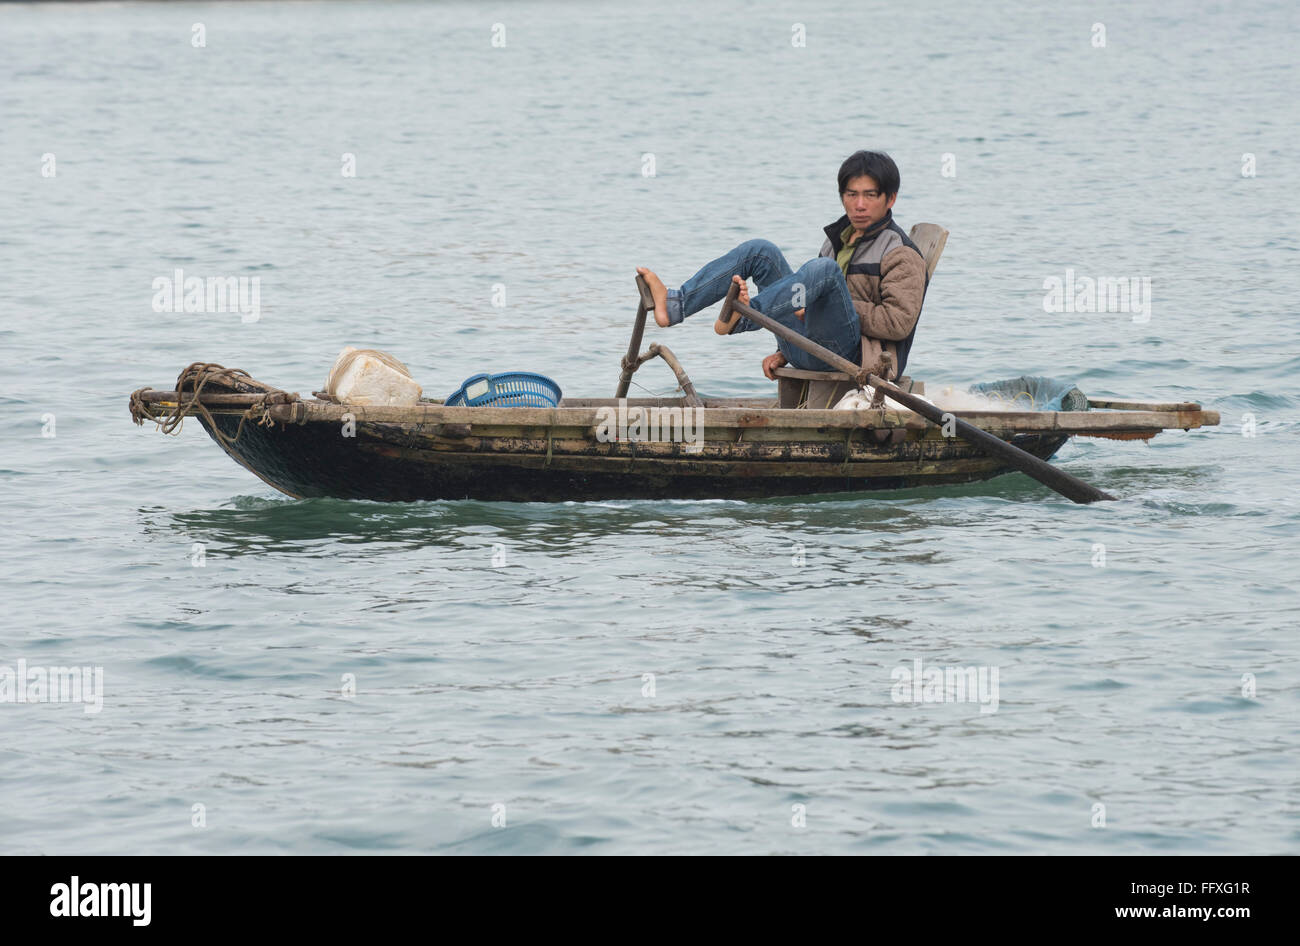 A small rowing boat used for fishing and transport, man traditionally using his feet to row, Halong Bay, Vietnam Stock Photo